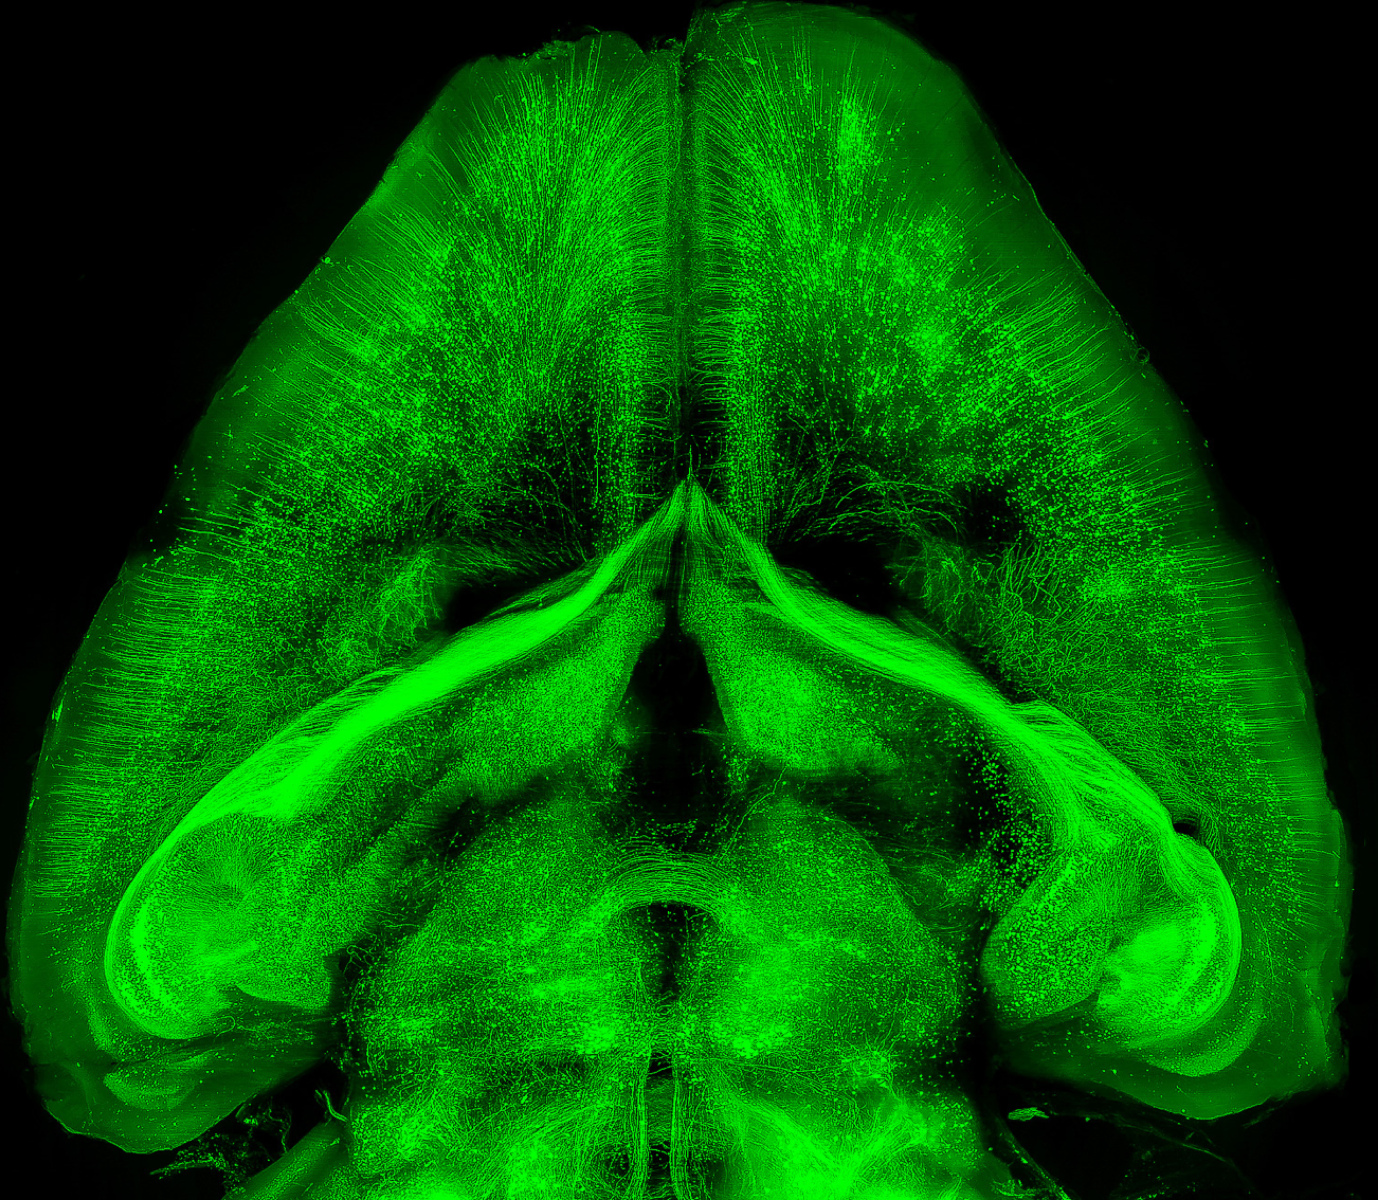 Neuronal structures in a mouse brain visualised using 3DISCO - 3D imaging of solvent-cleared organs